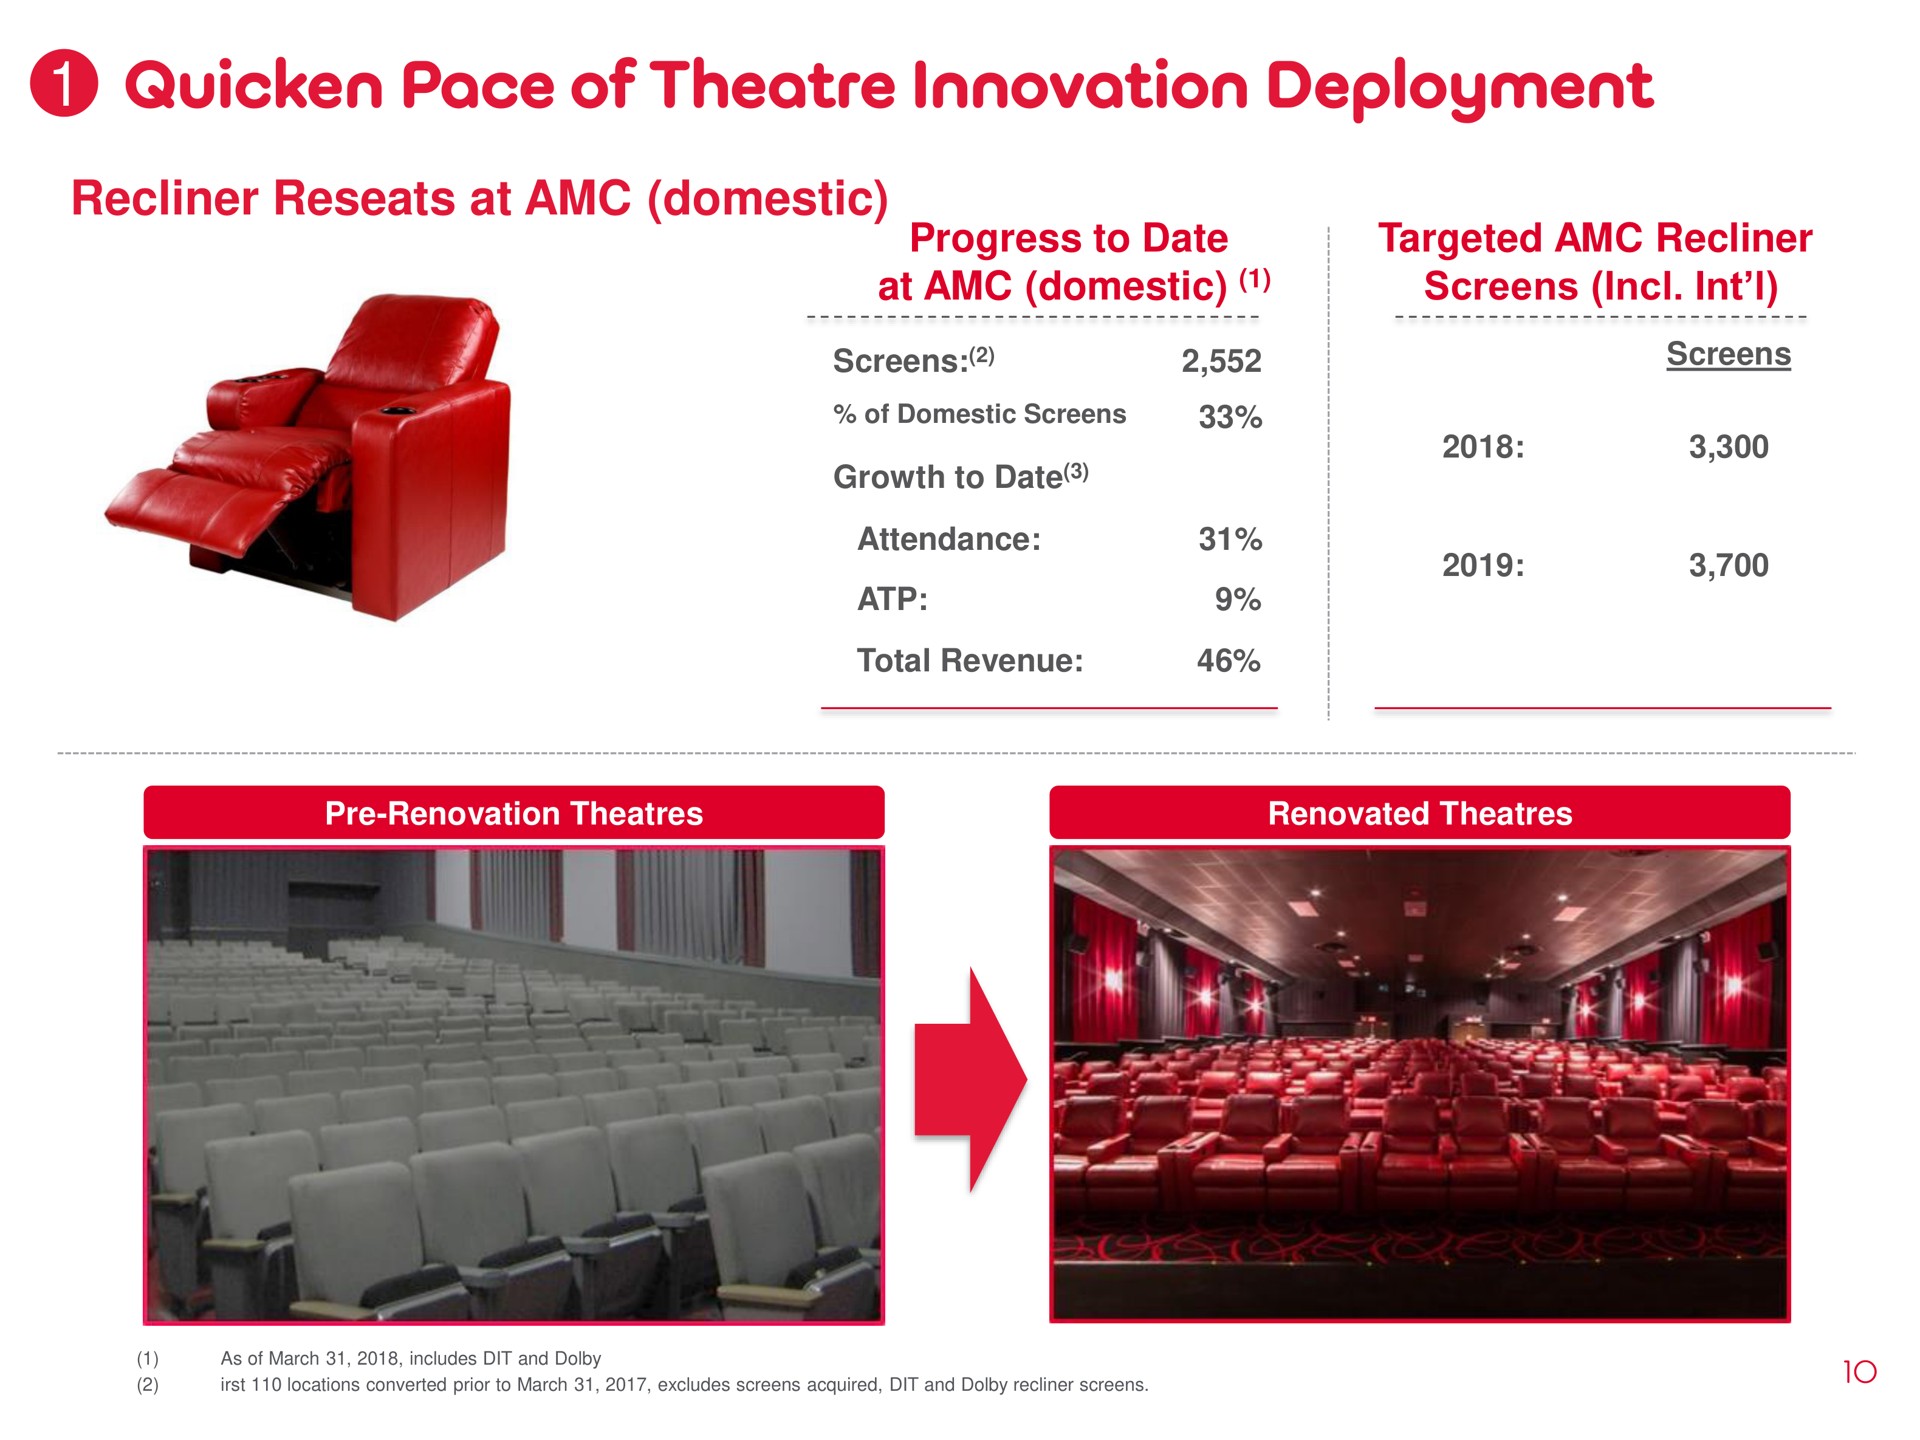 quicken pace of innovation deployment recliner reseats at domestic | AMC